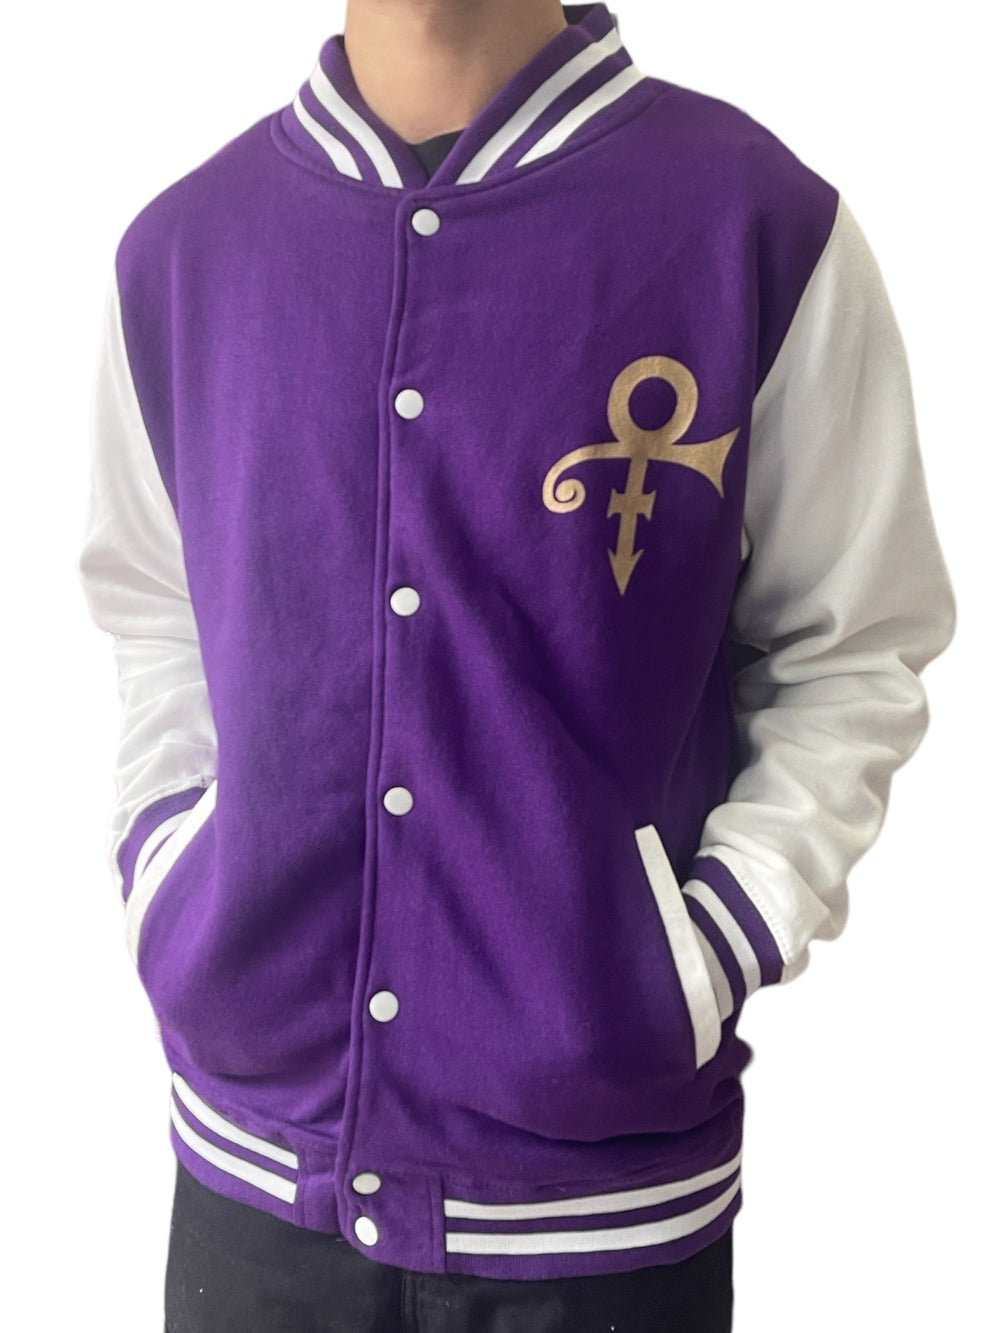 Prince – Doves Varsity Jacket Unisex Official Size Small NEW